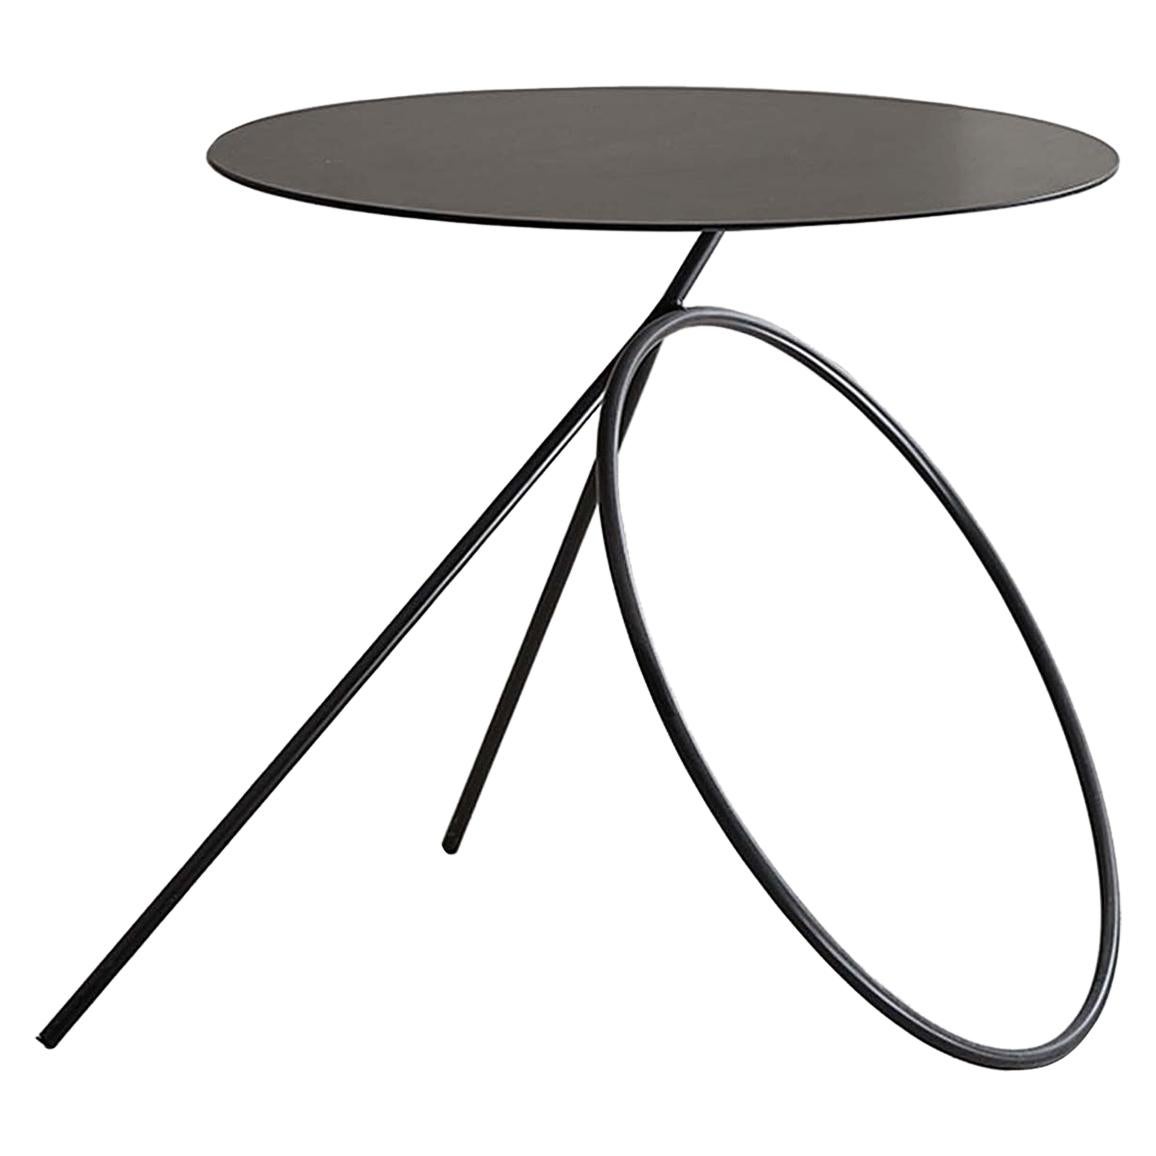 Viccarbe Bamba Side or Coffee Table, Black Finish by Pedro Paulo Venzón For Sale